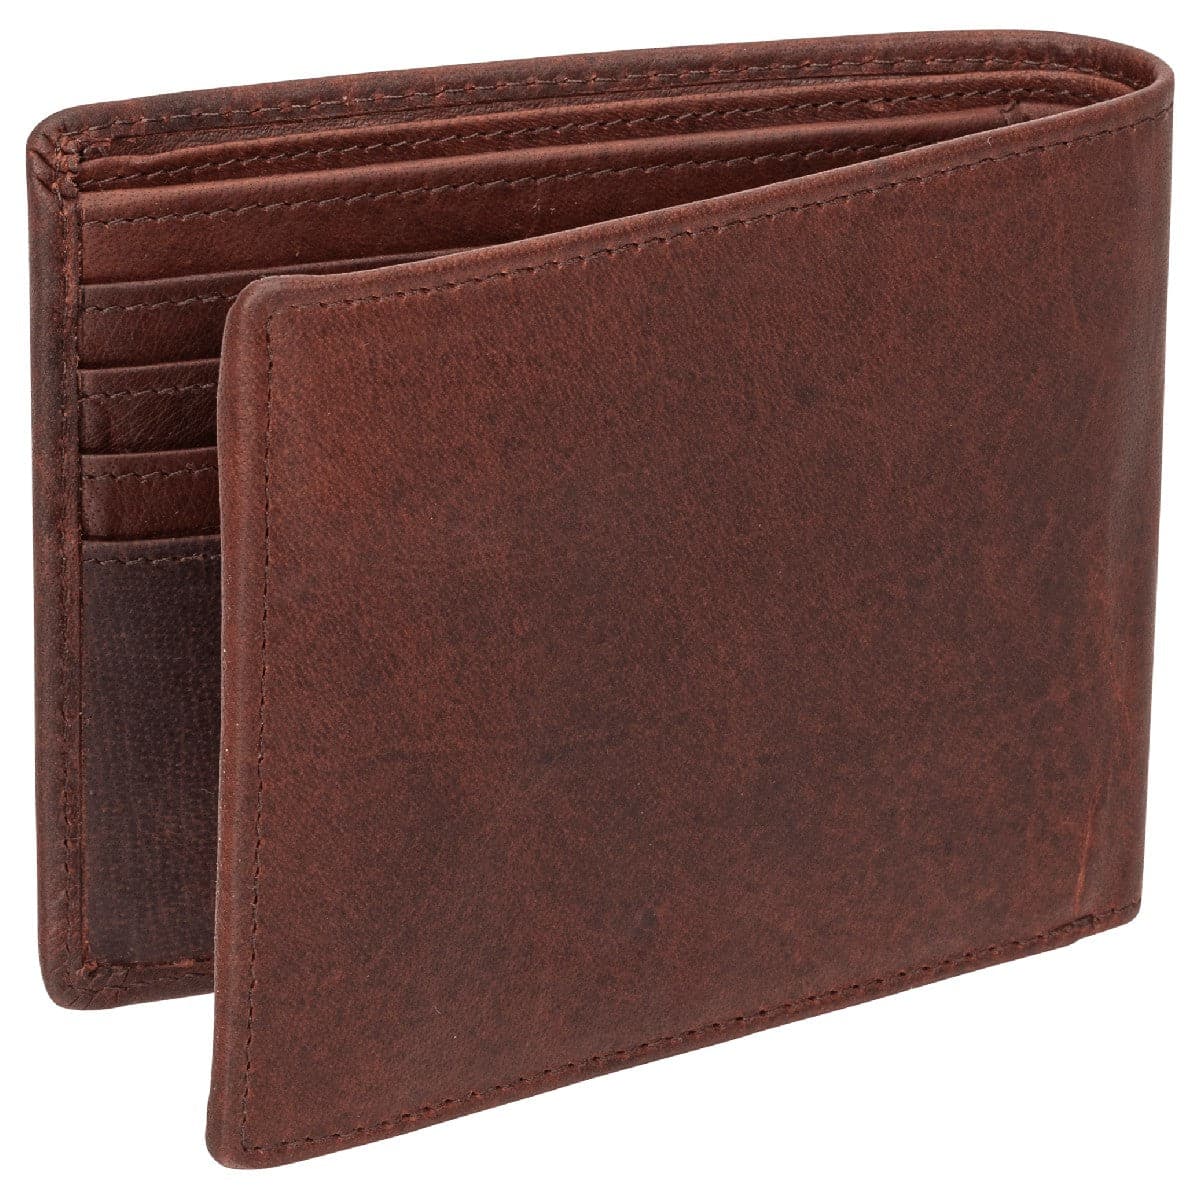 Mancini Buffalo RFID Secure Wallet with Coin Pocket